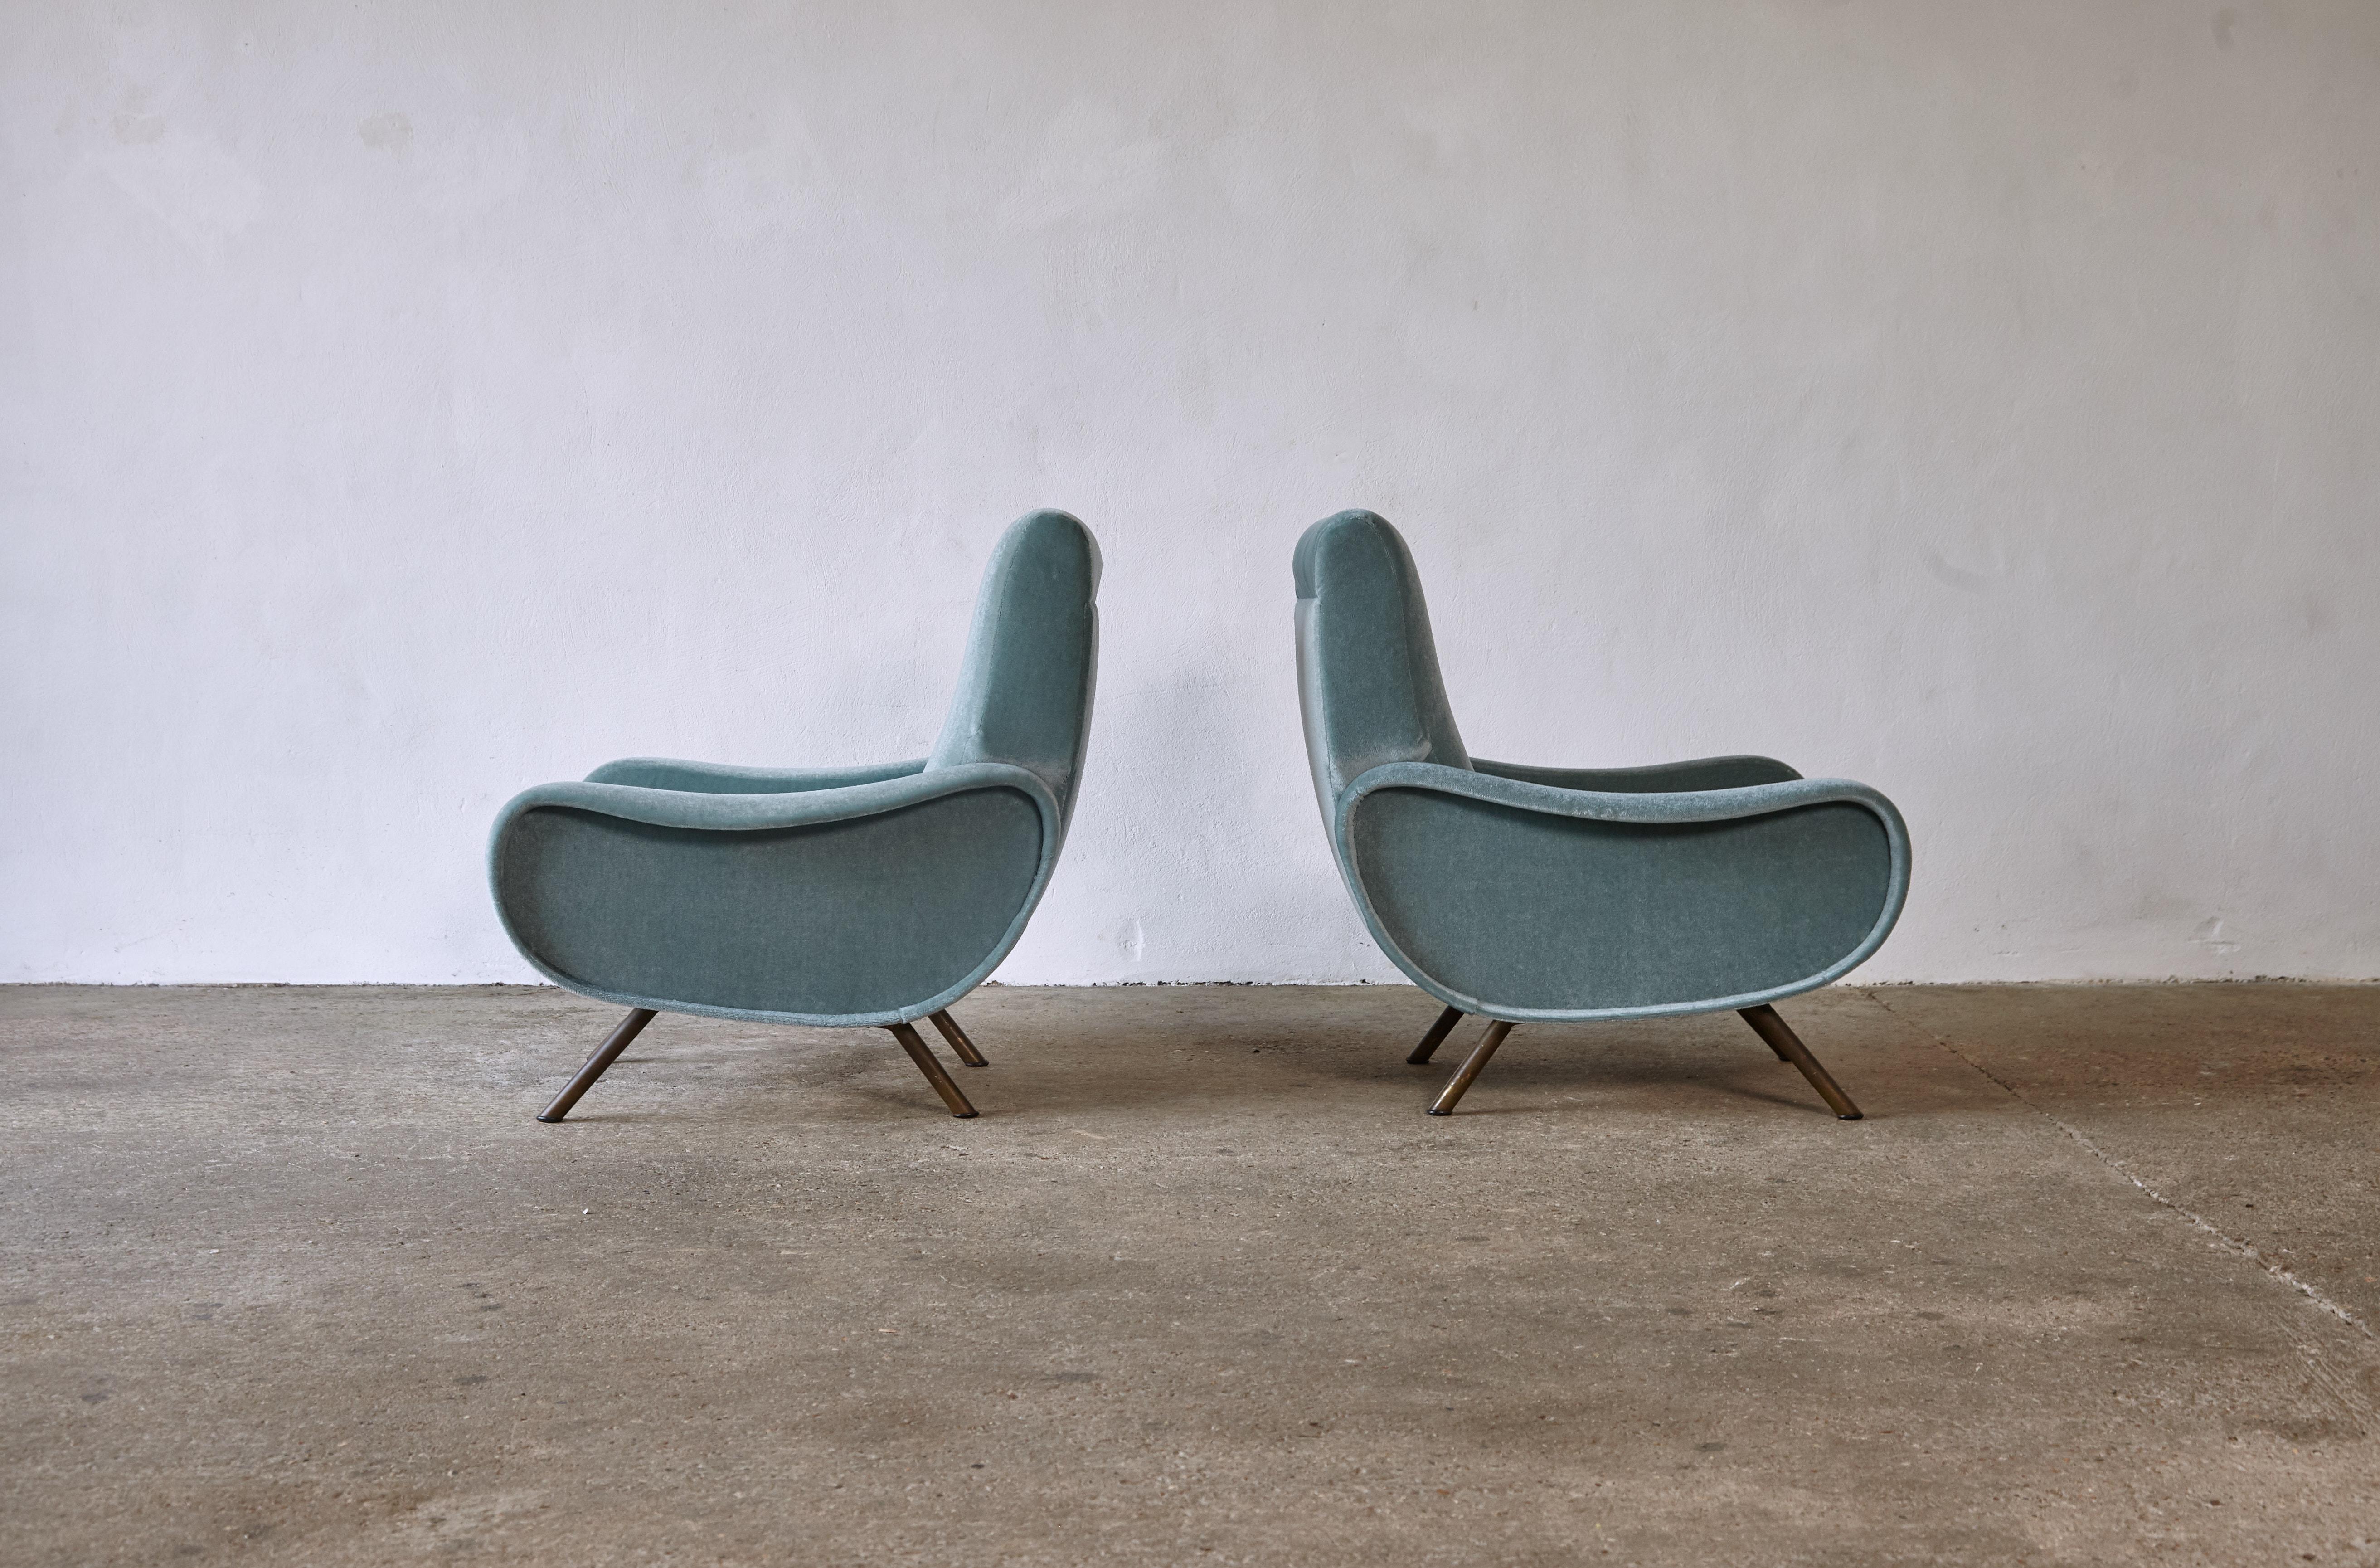 Italian Authentic Marco Zanuso Lady Chairs, 1950s, Newly Reupholstered in Pure Mohair